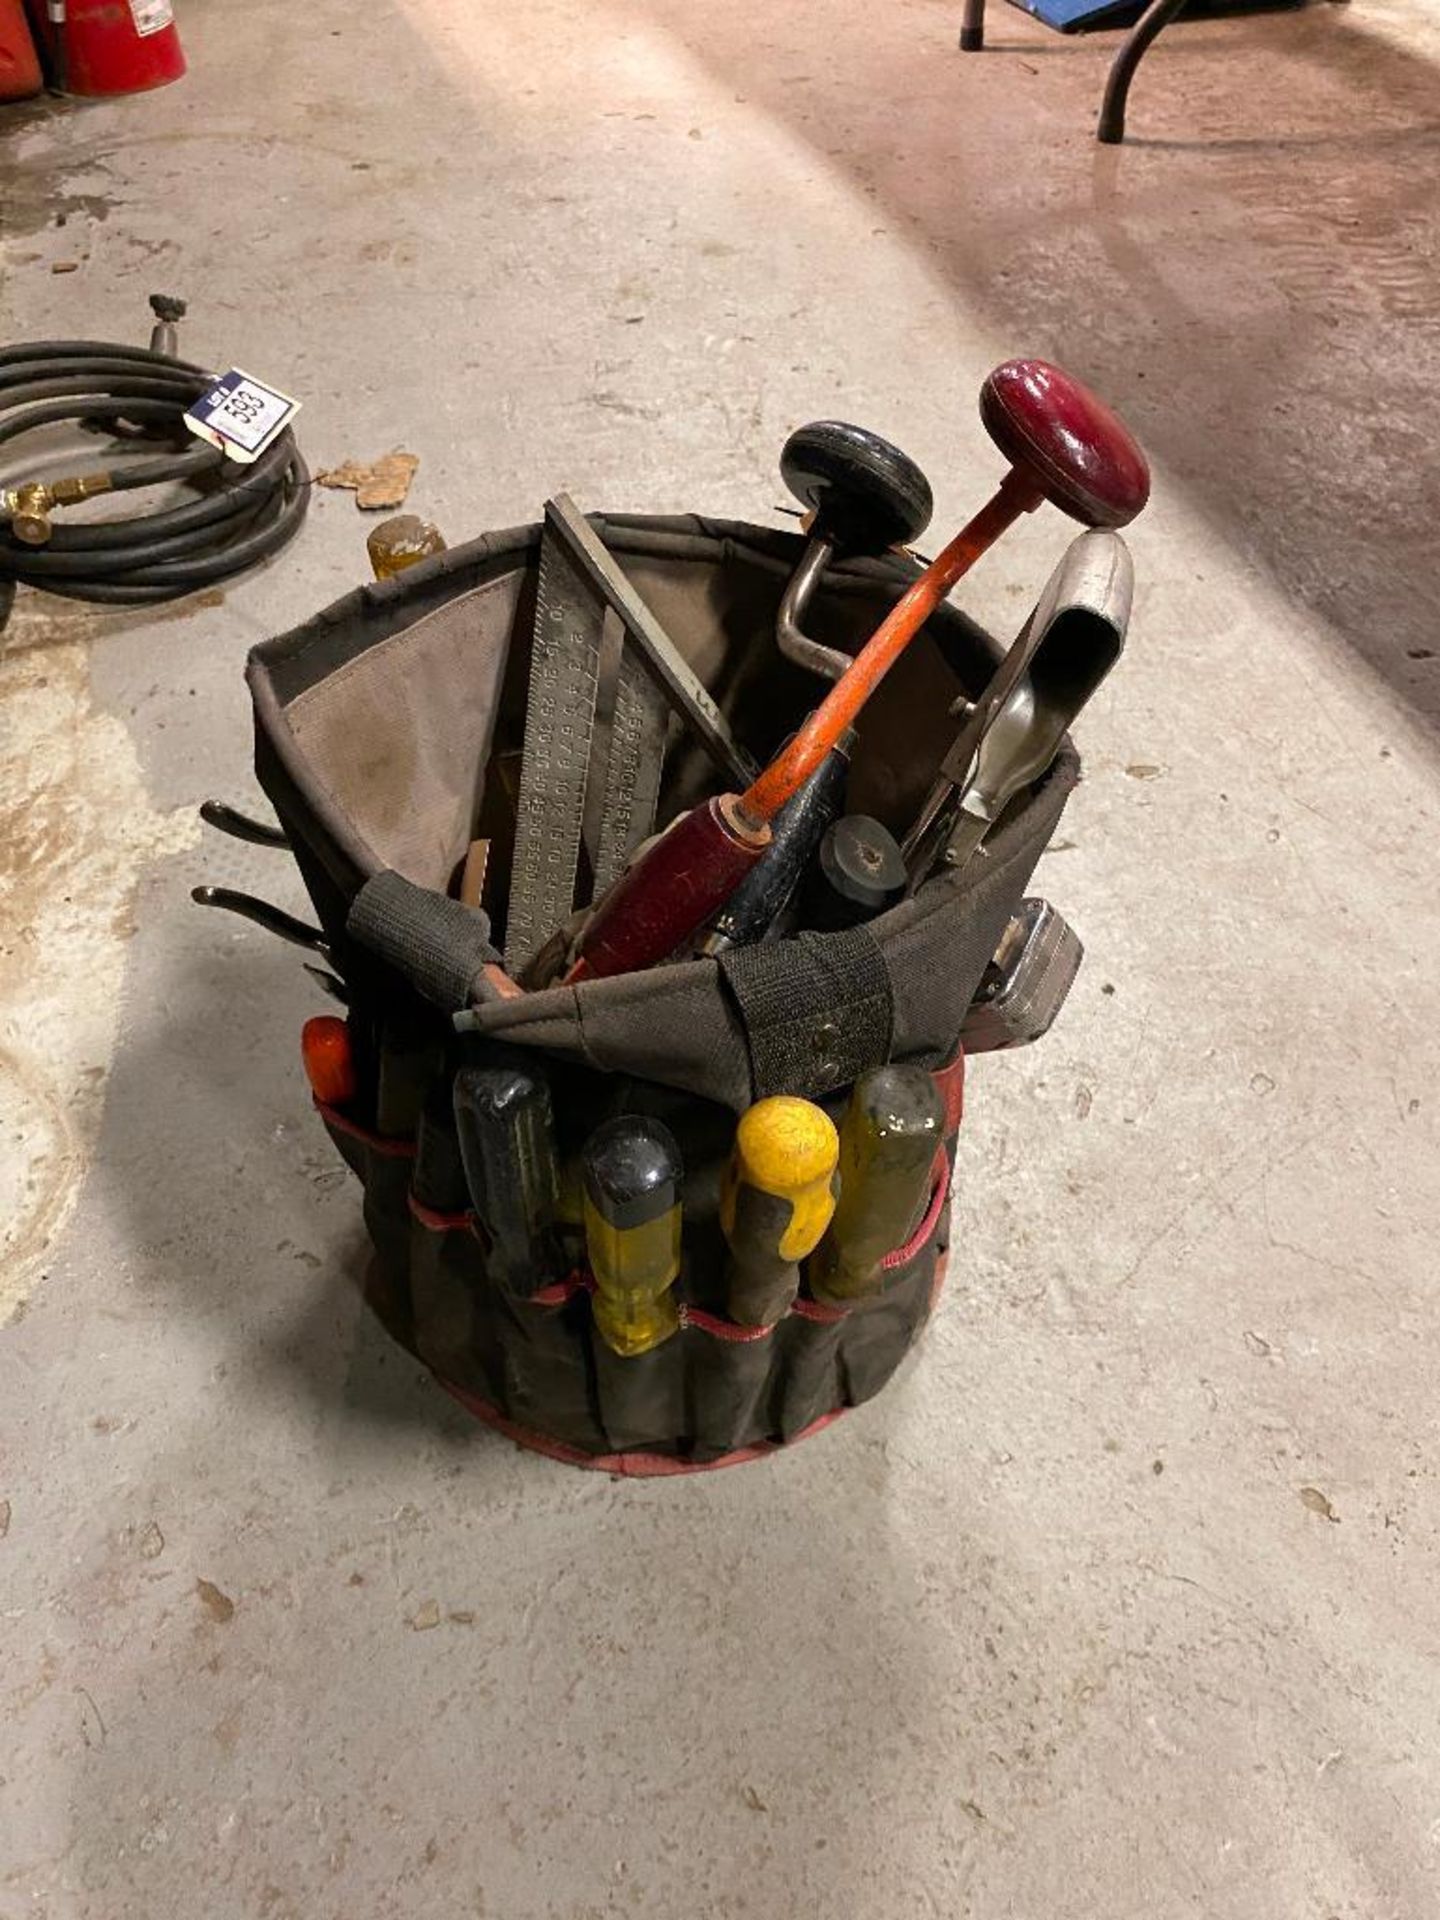 Electricians Tool Bag w/ Screw Drivers, Square, Tape Measure, Saw, Hammer, etc. - Image 3 of 4